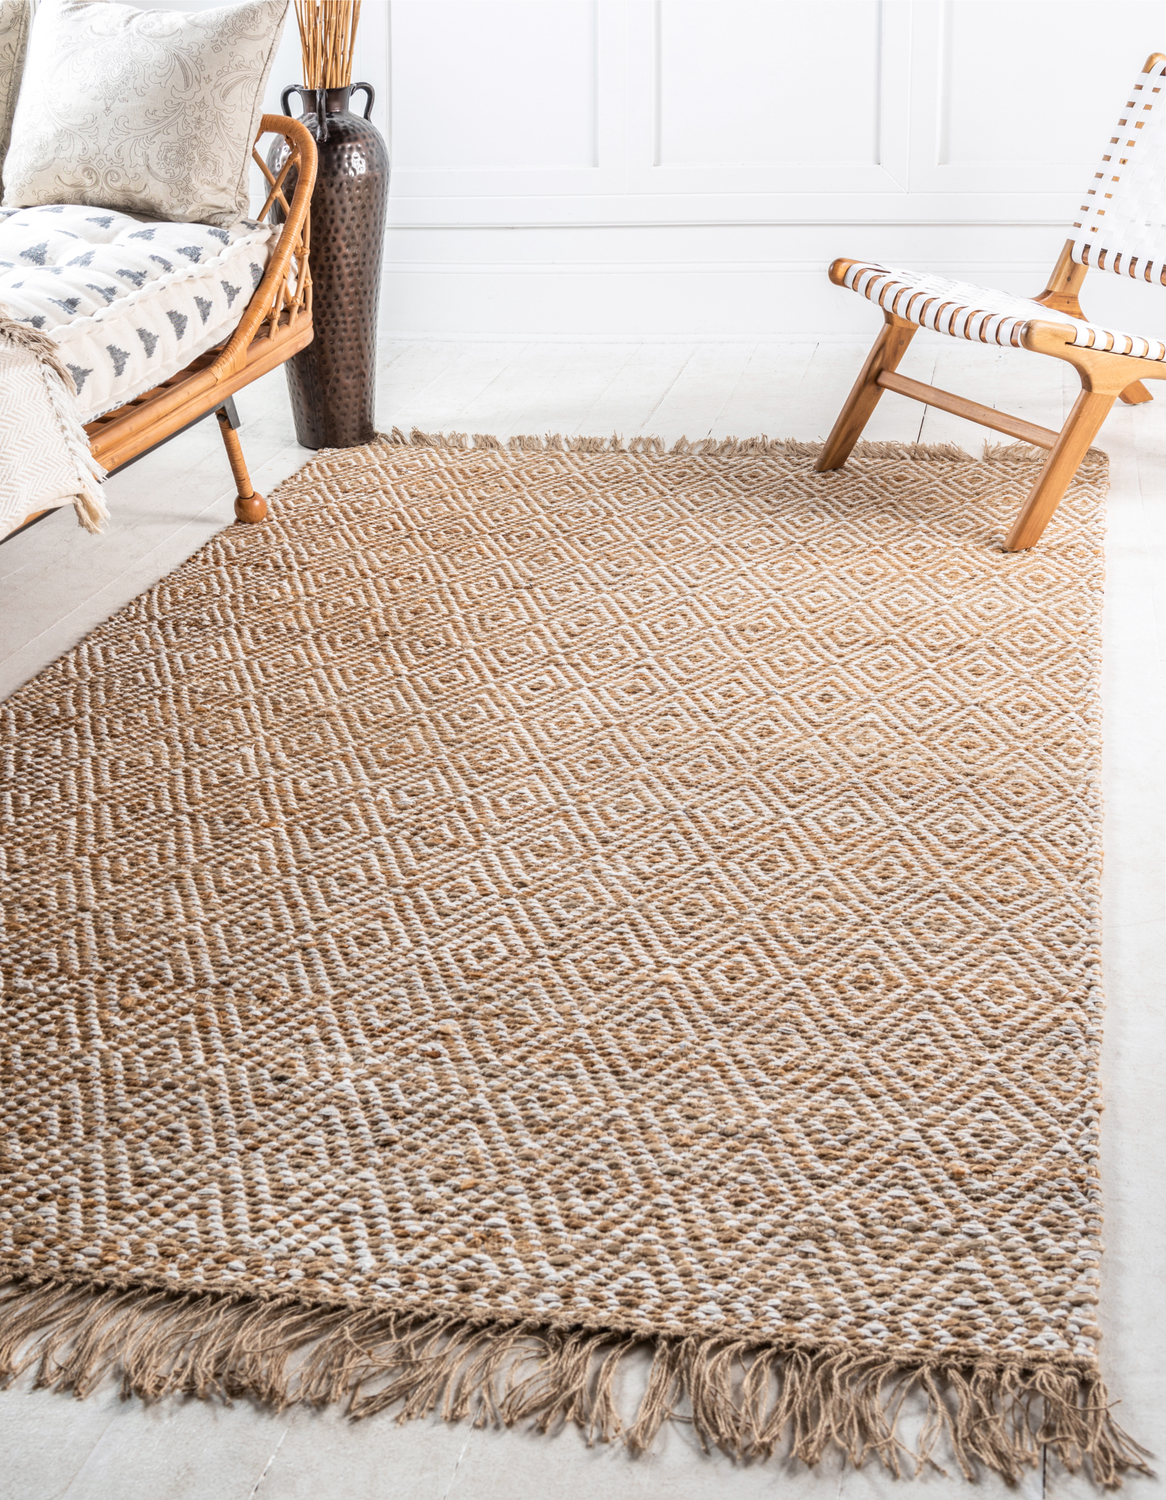 5 x 5 area rug Unique Loom Area Rugs Natural/Ivory Hand Woven; 3x2